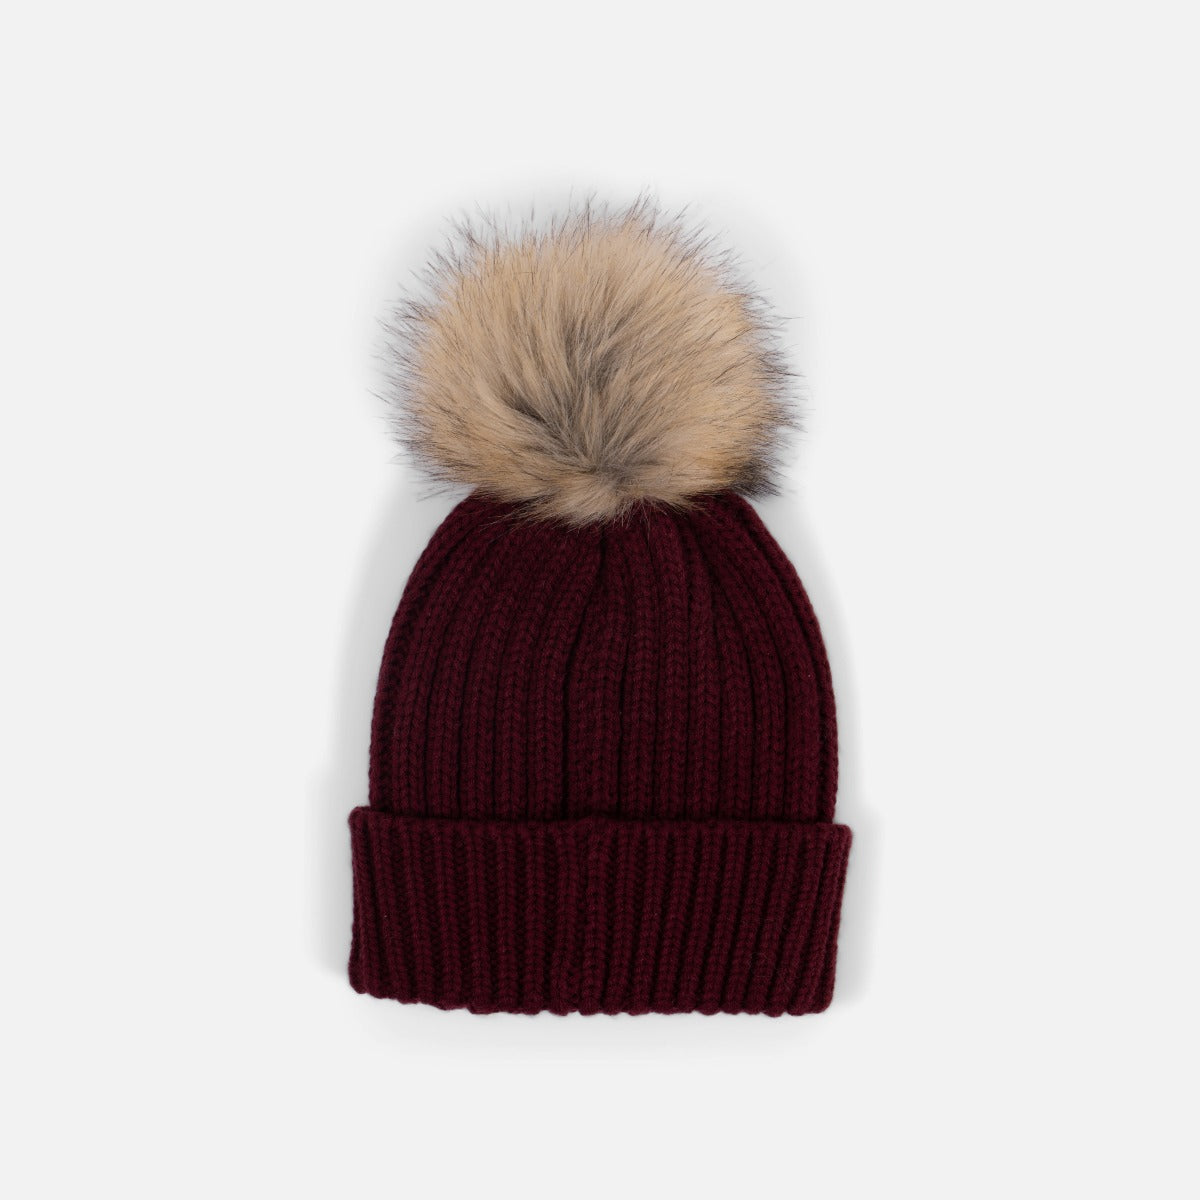 Black knit beanie with removable brown pompom